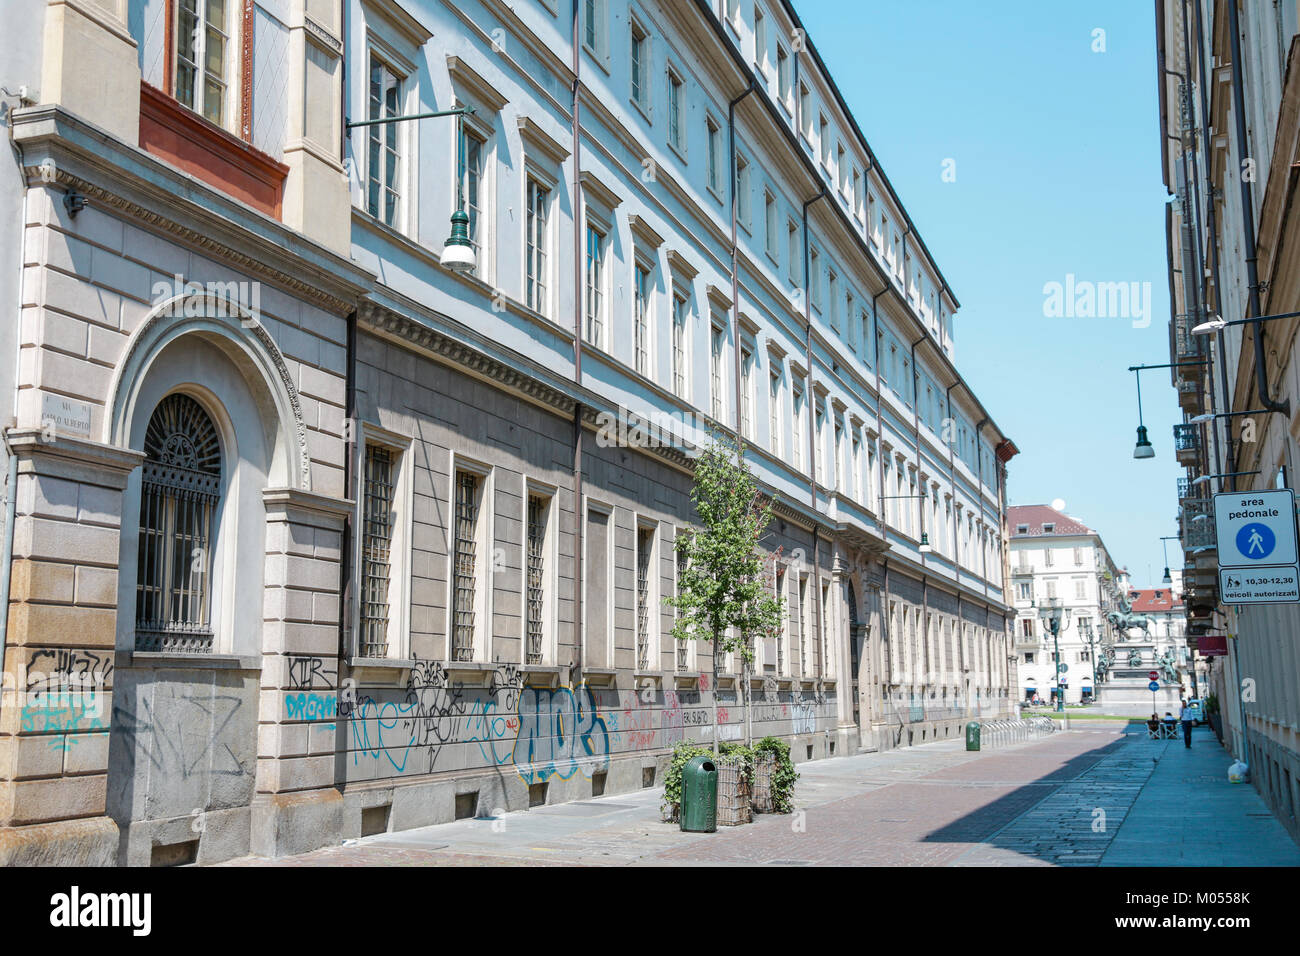 Turin, Italy: Palazzo Campana, university of Maths and science, and historical palaces in the city center, interiors and external view, in a sunny day Stock Photo